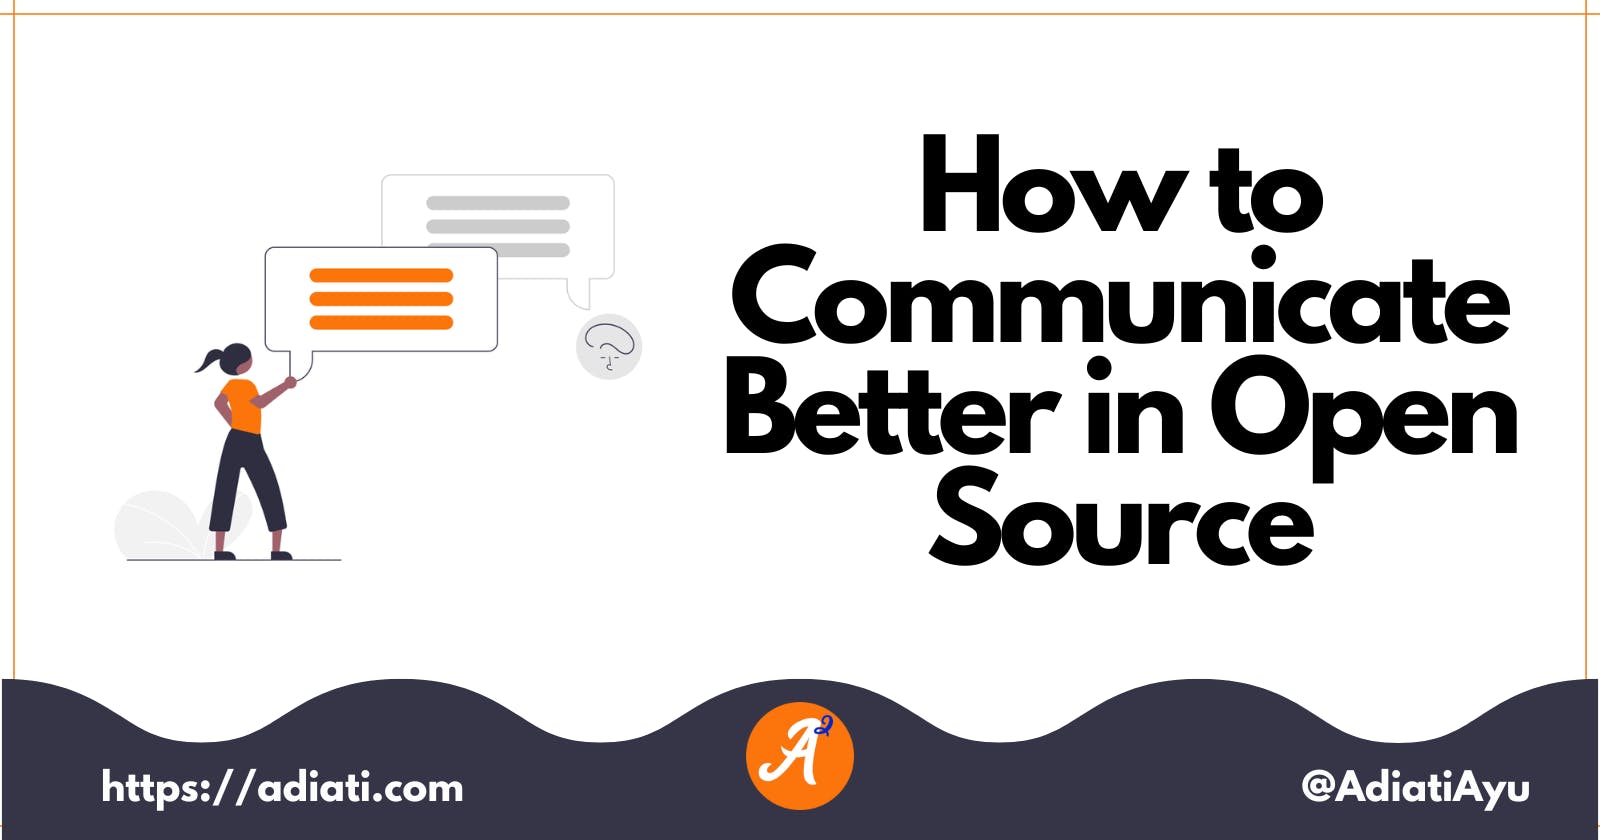 How to Communicate Better in Open Source